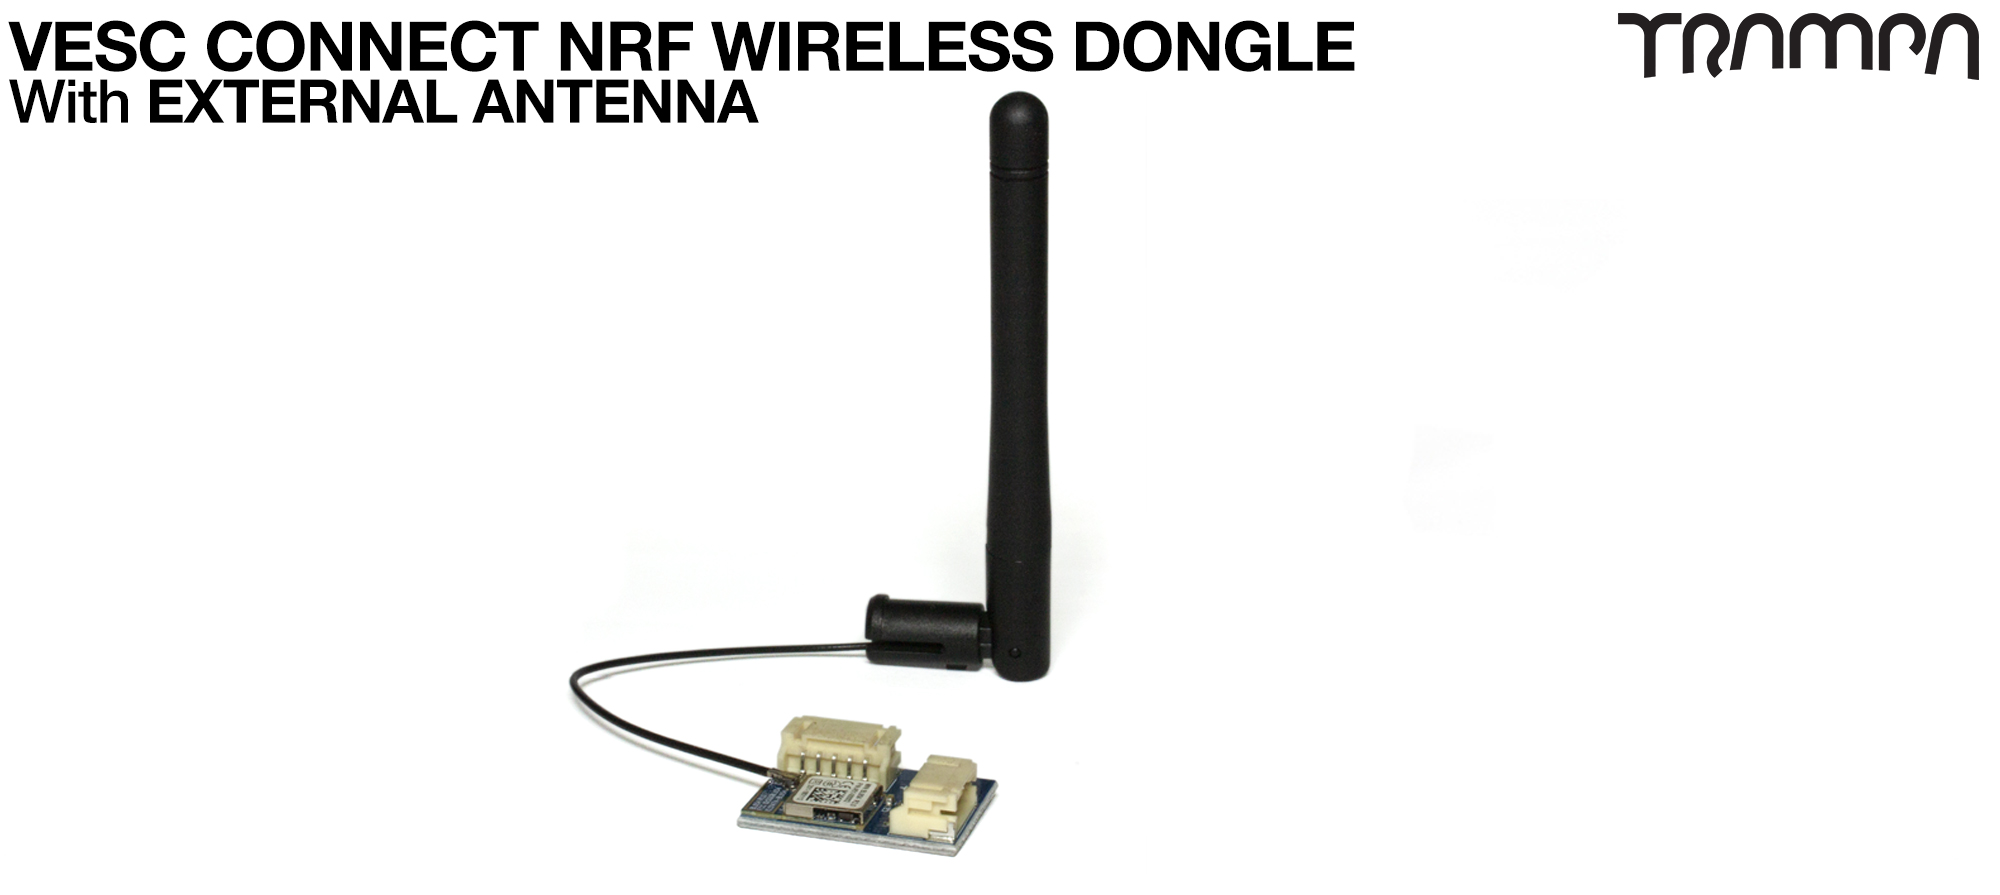 Please supply an EXTERNAL ARIAL Wireless NRF VESC Connect Dongle (+£35)